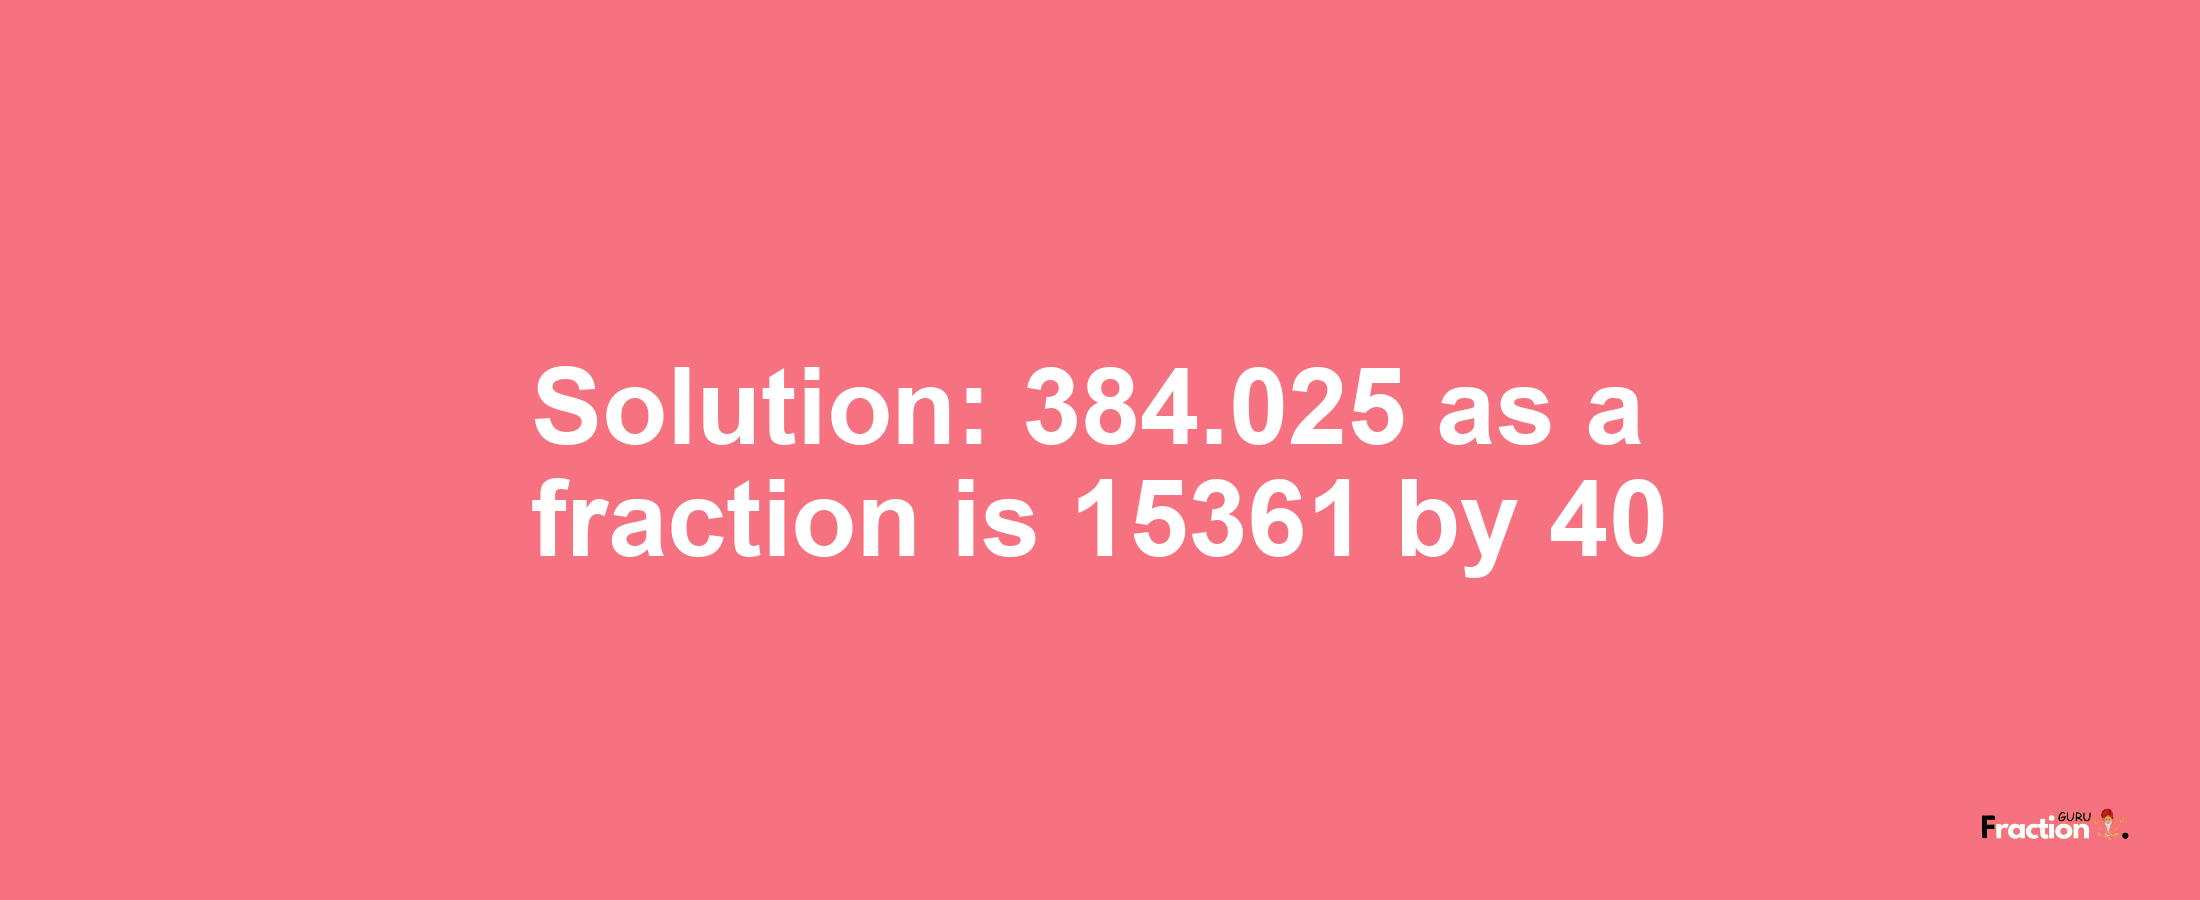 Solution:384.025 as a fraction is 15361/40